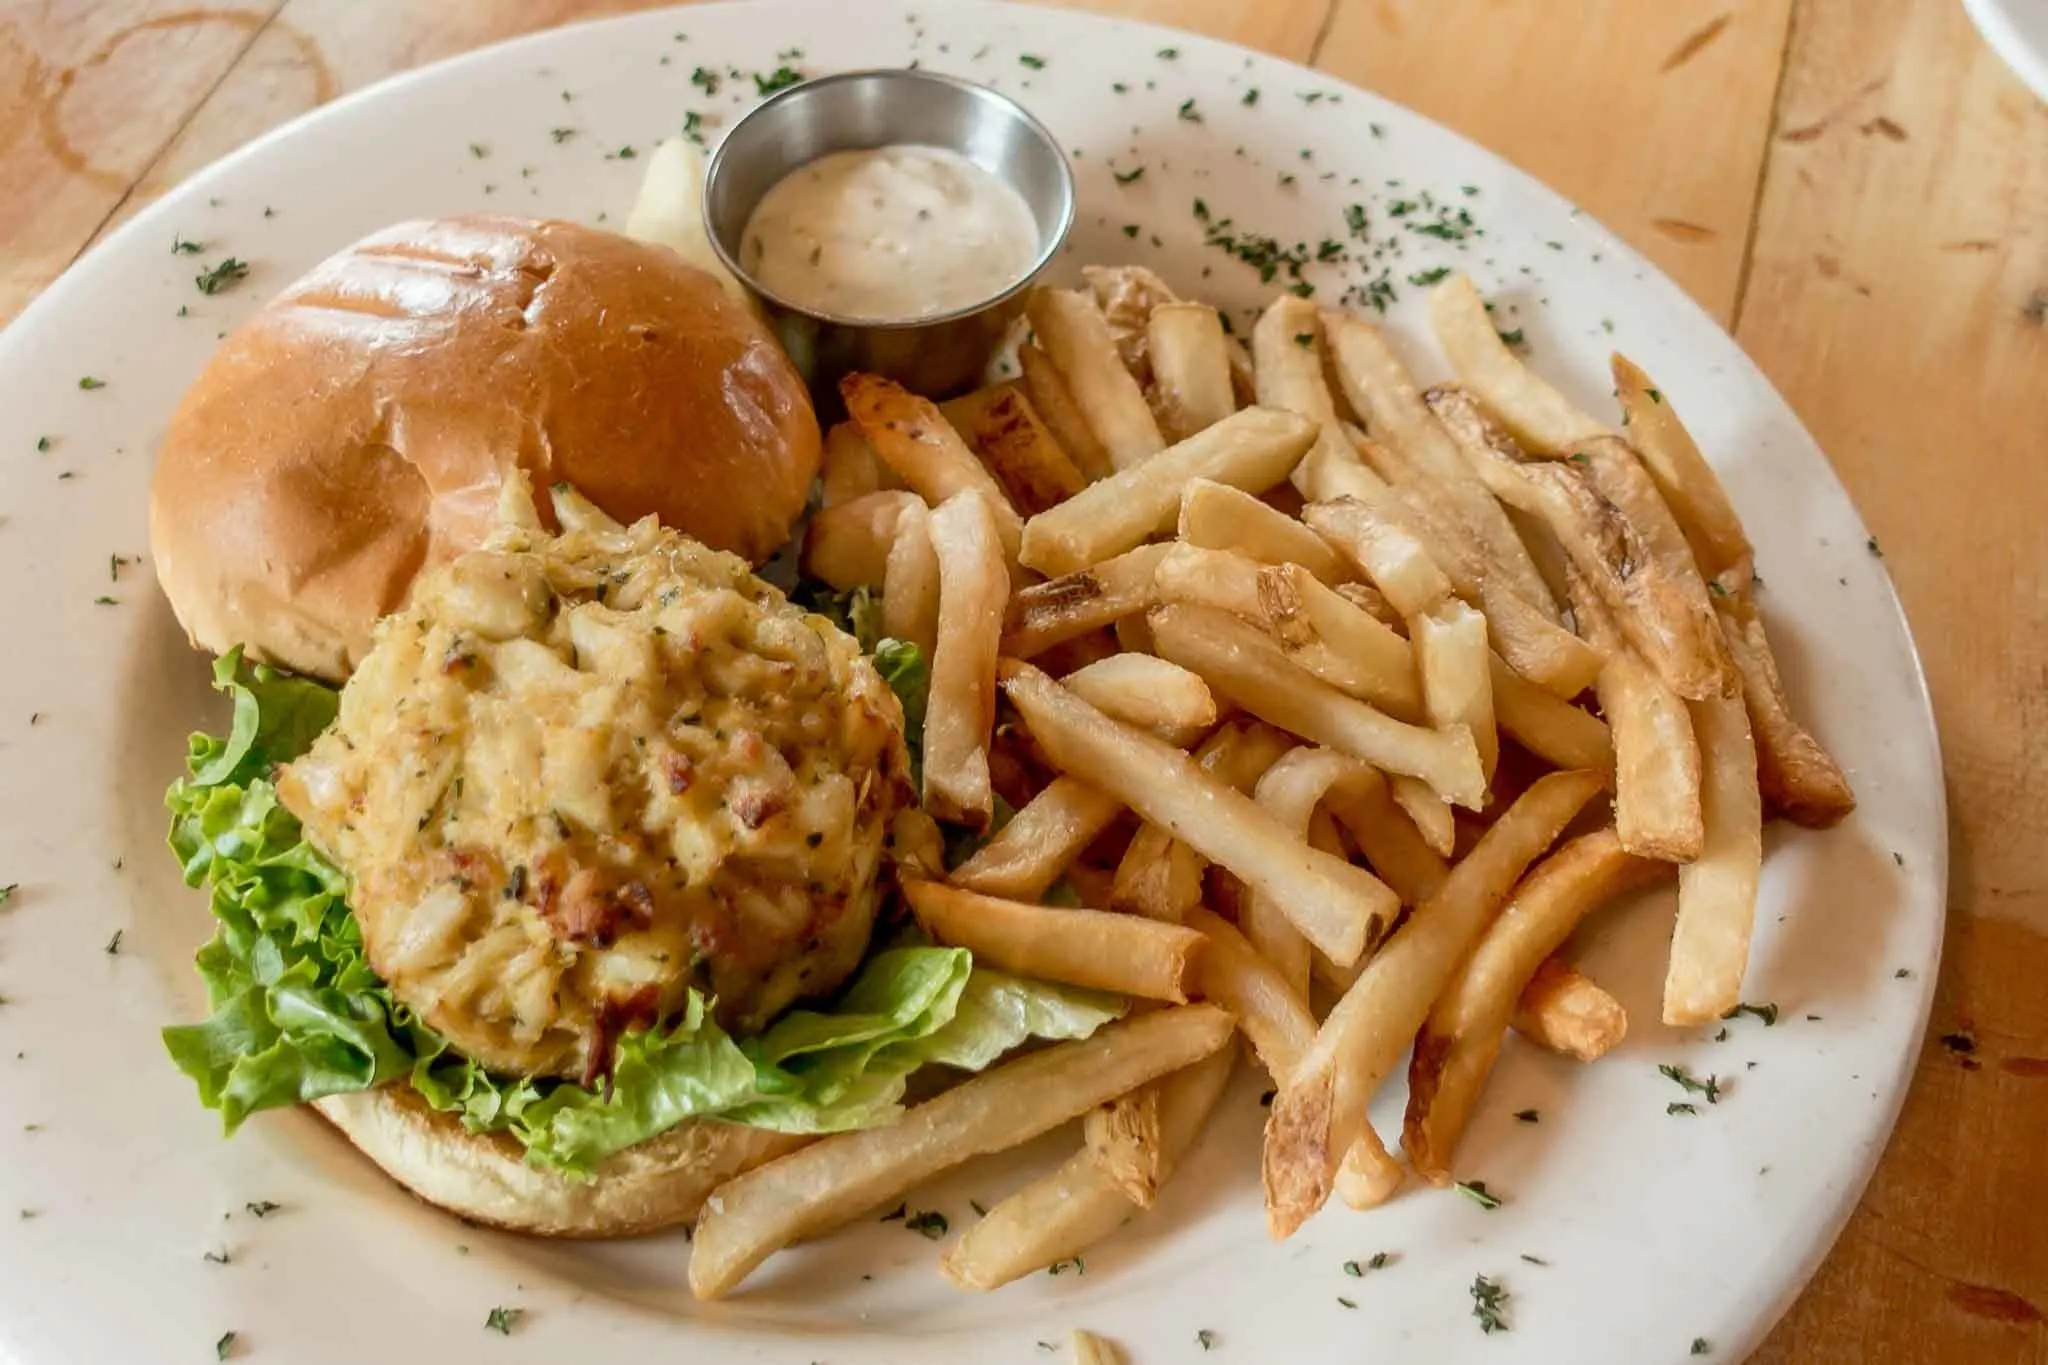 Crabcake sandwich and French fries on a plate.